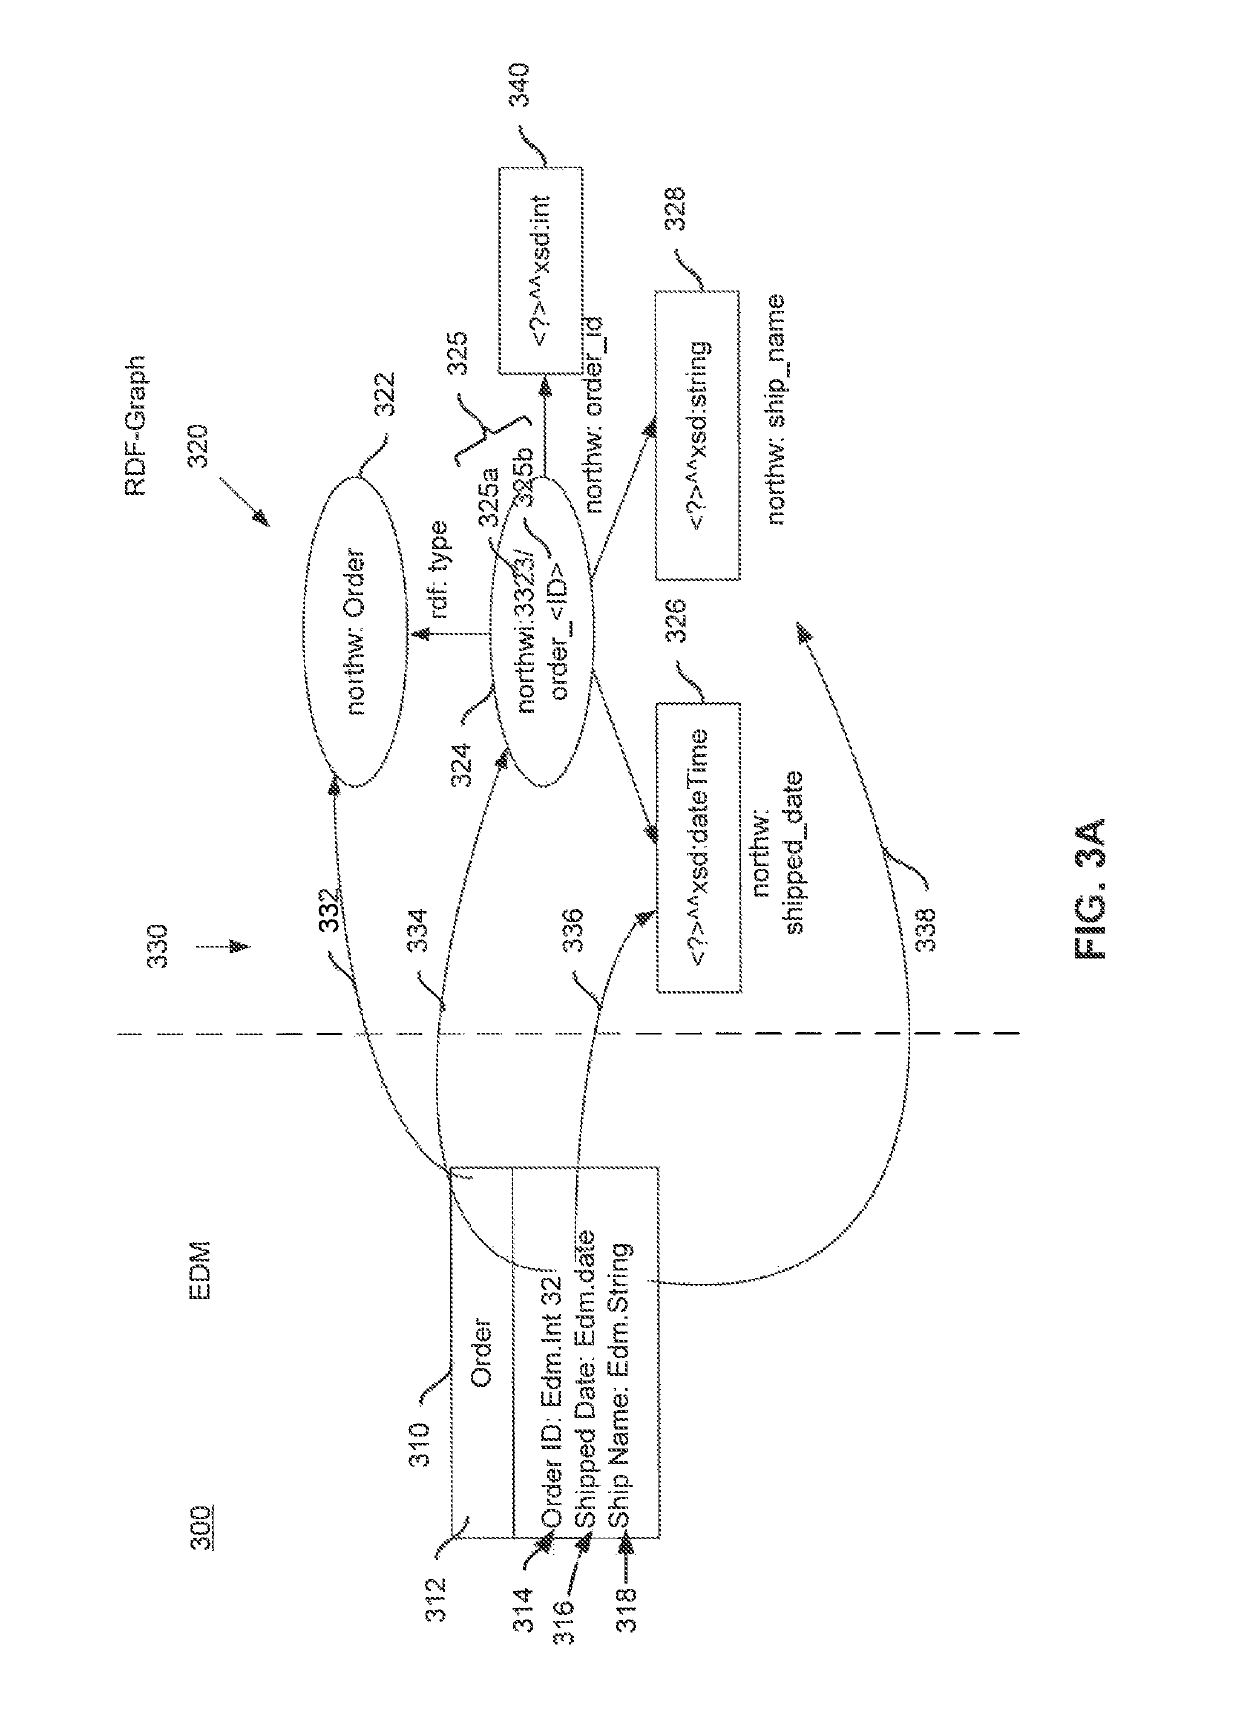 Semantic mapping of data from an entity-relationship model to a graph-based data format to facilitate simplified querying